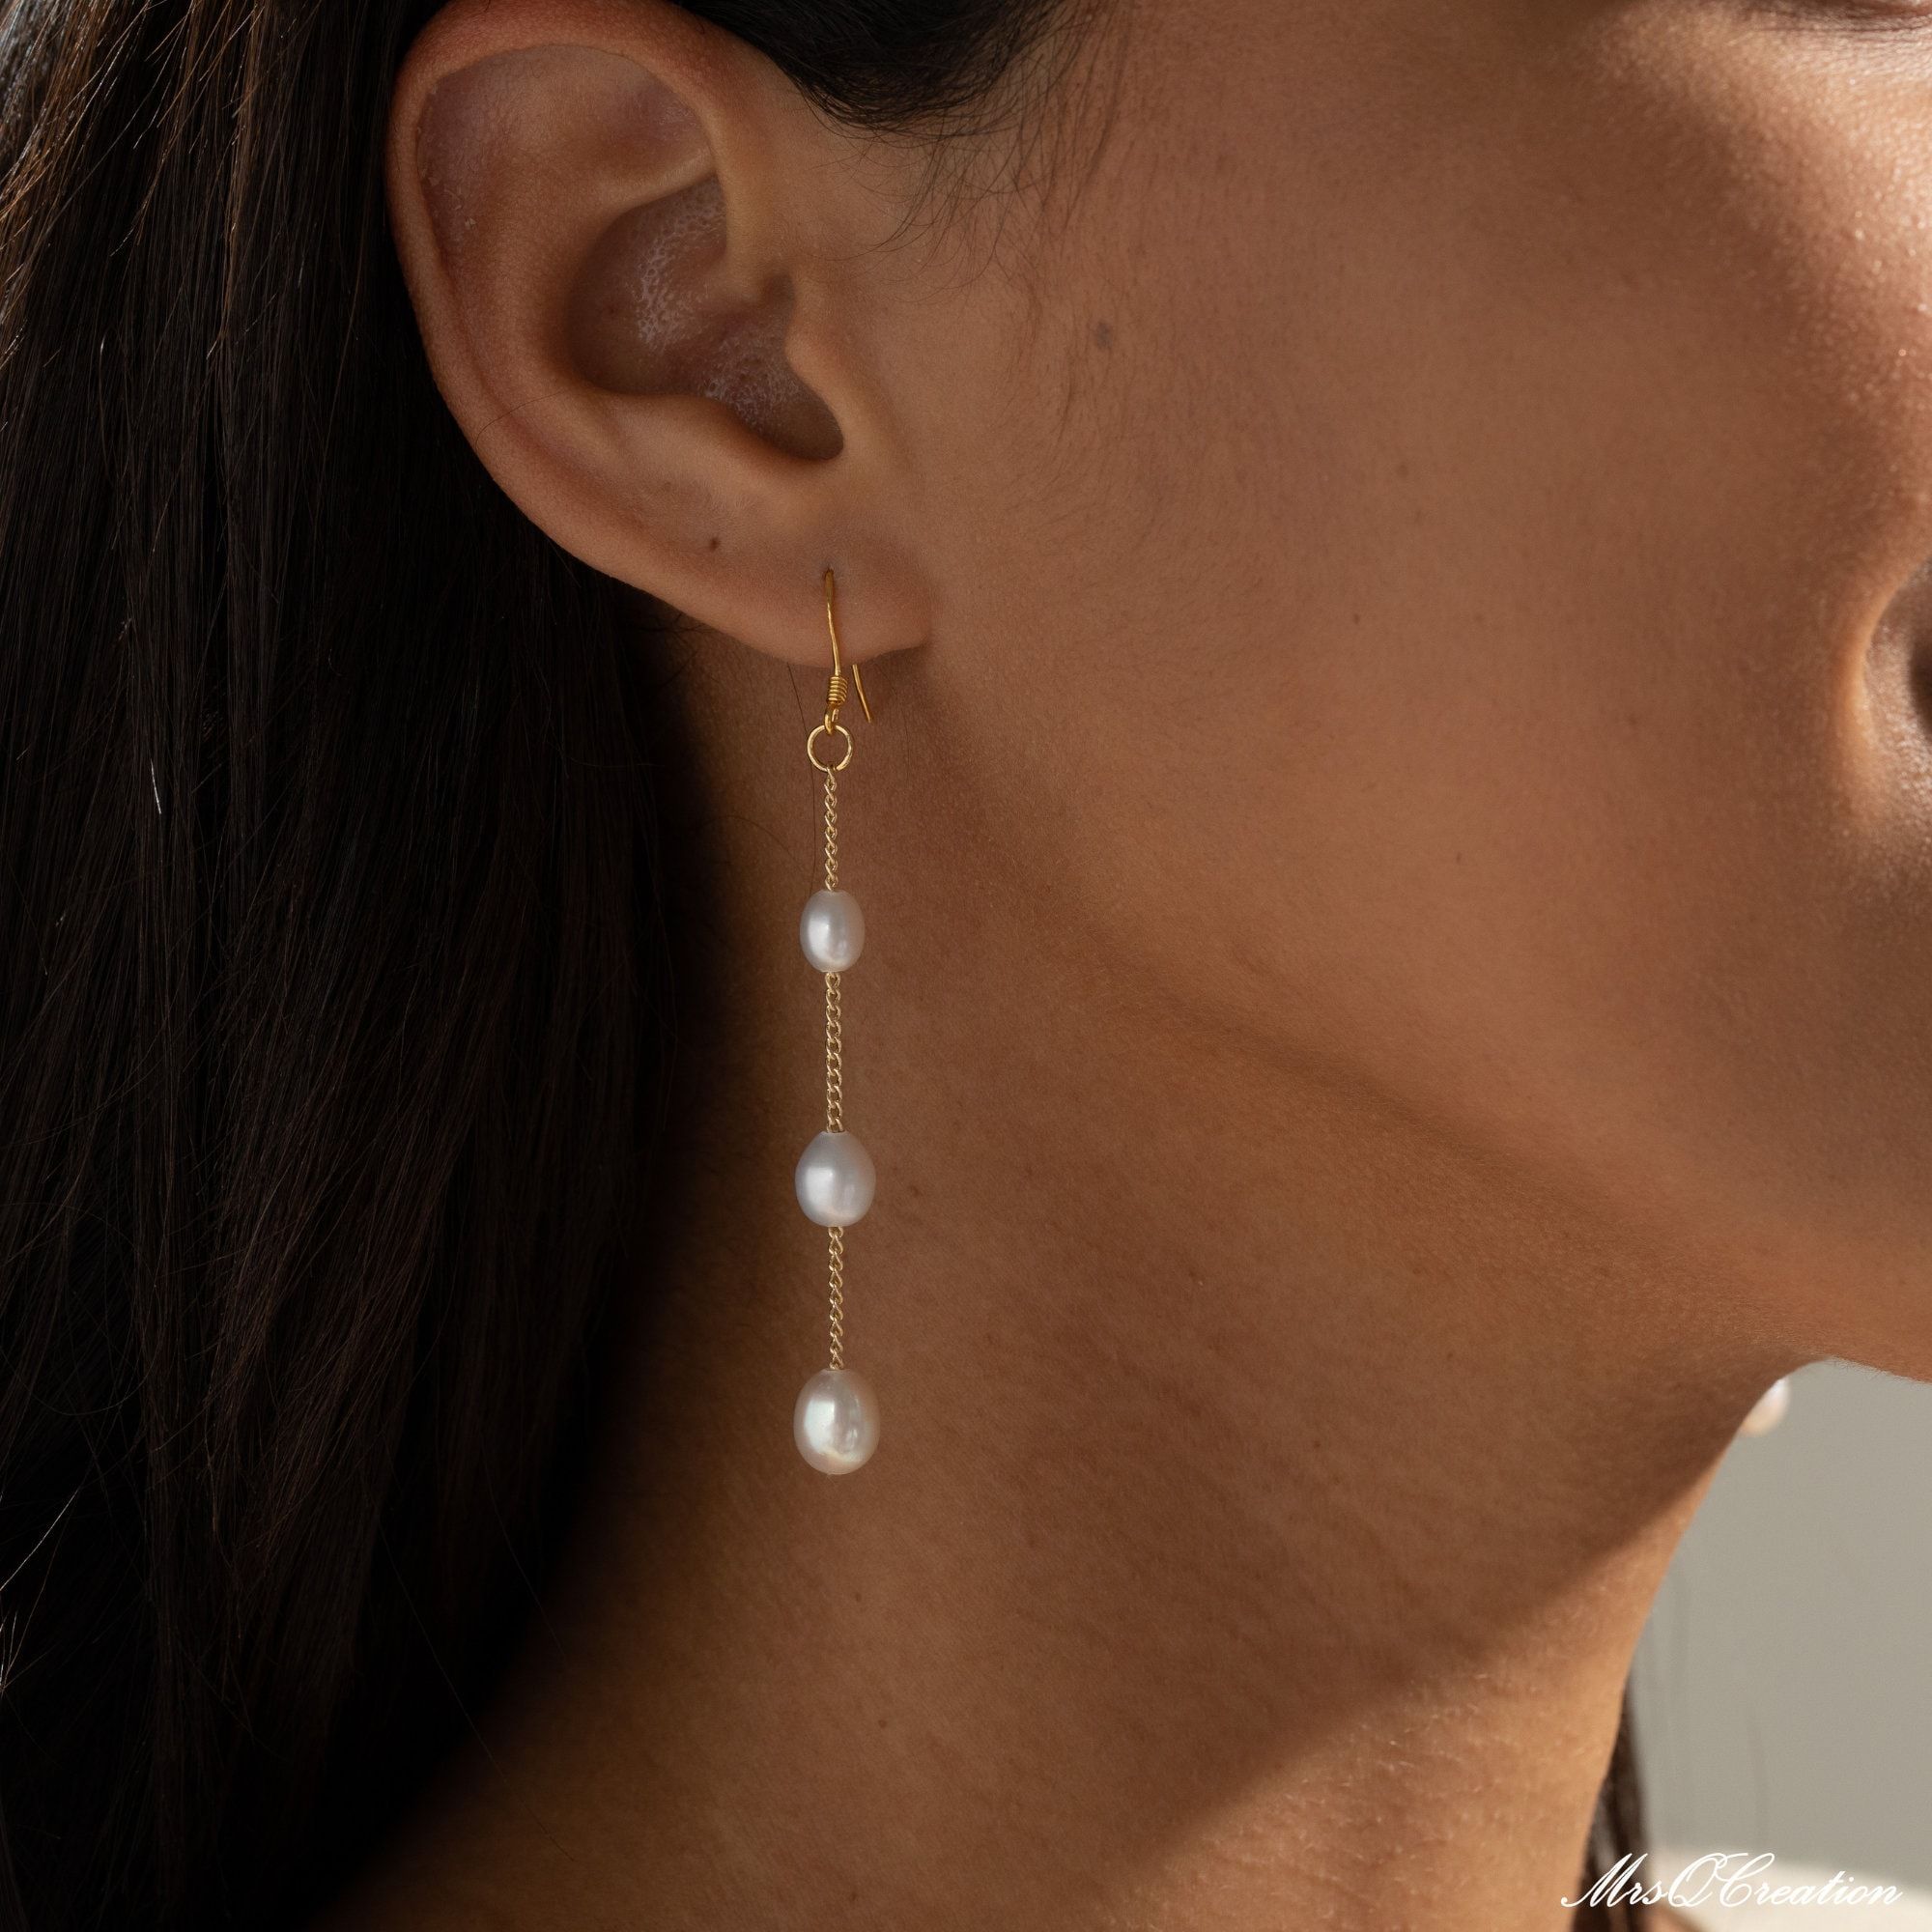 Elegant wedding earrings for your special day